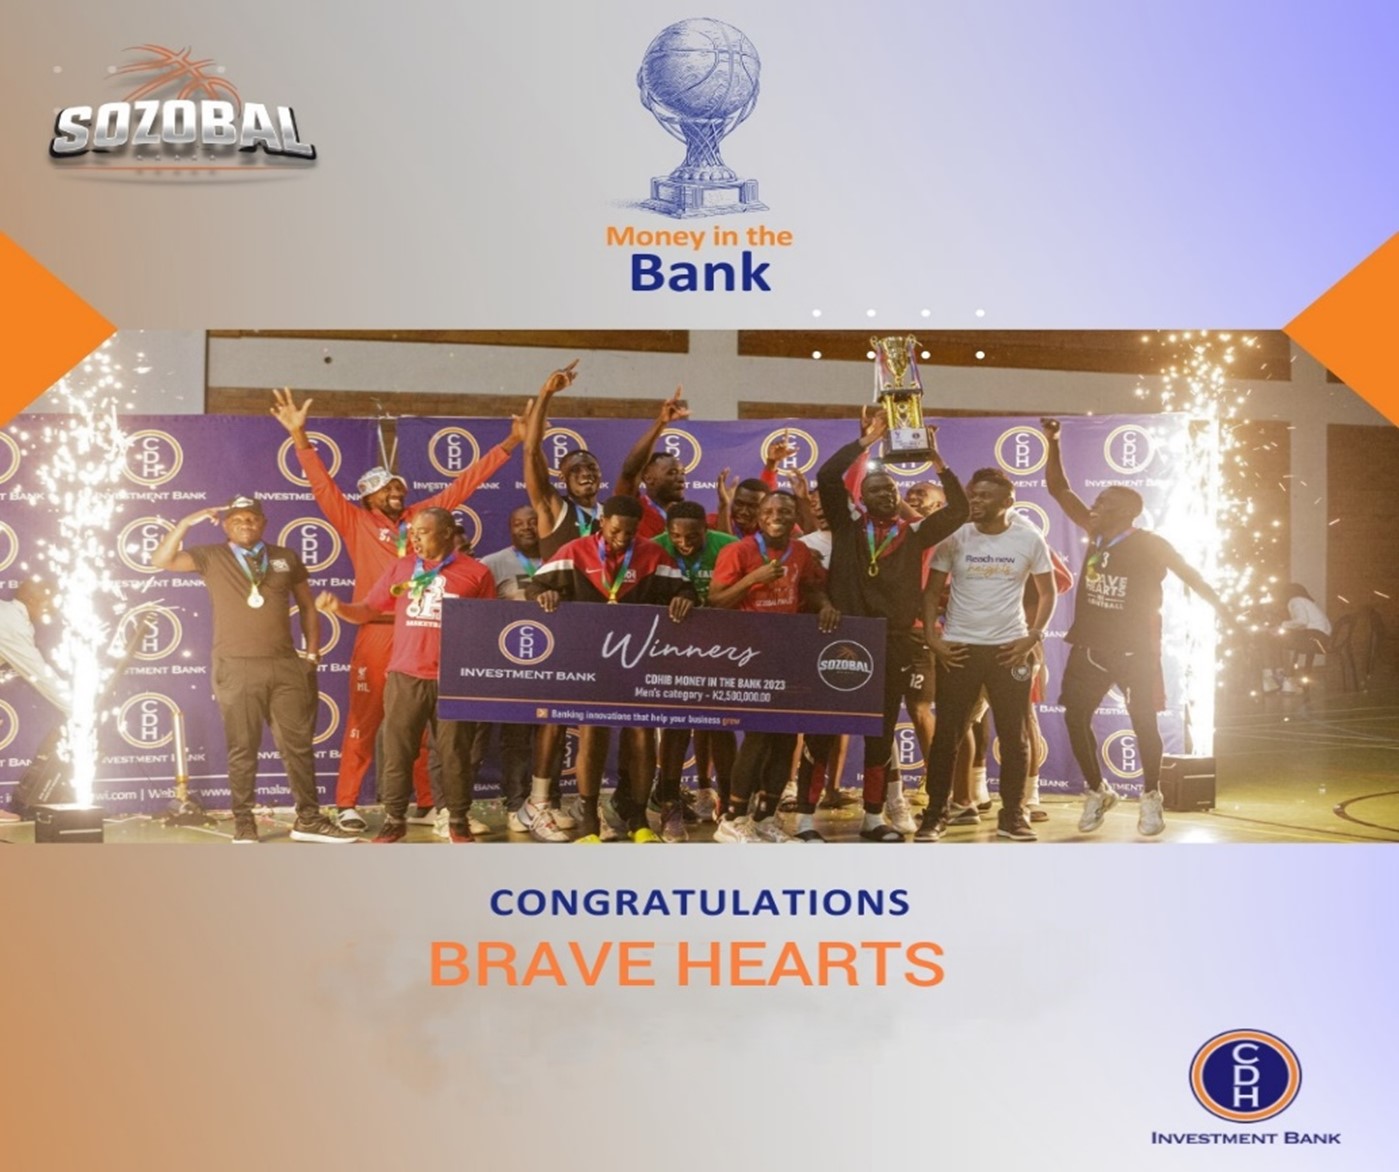 Brave Hearts men celebrate receiving the champion’s trophy for the CDHIB ‘Money in the Bank’ basketball tournament from CDH Investment Bank’s Acting Chief Business Development Officer, Mr Jamal Kamoto